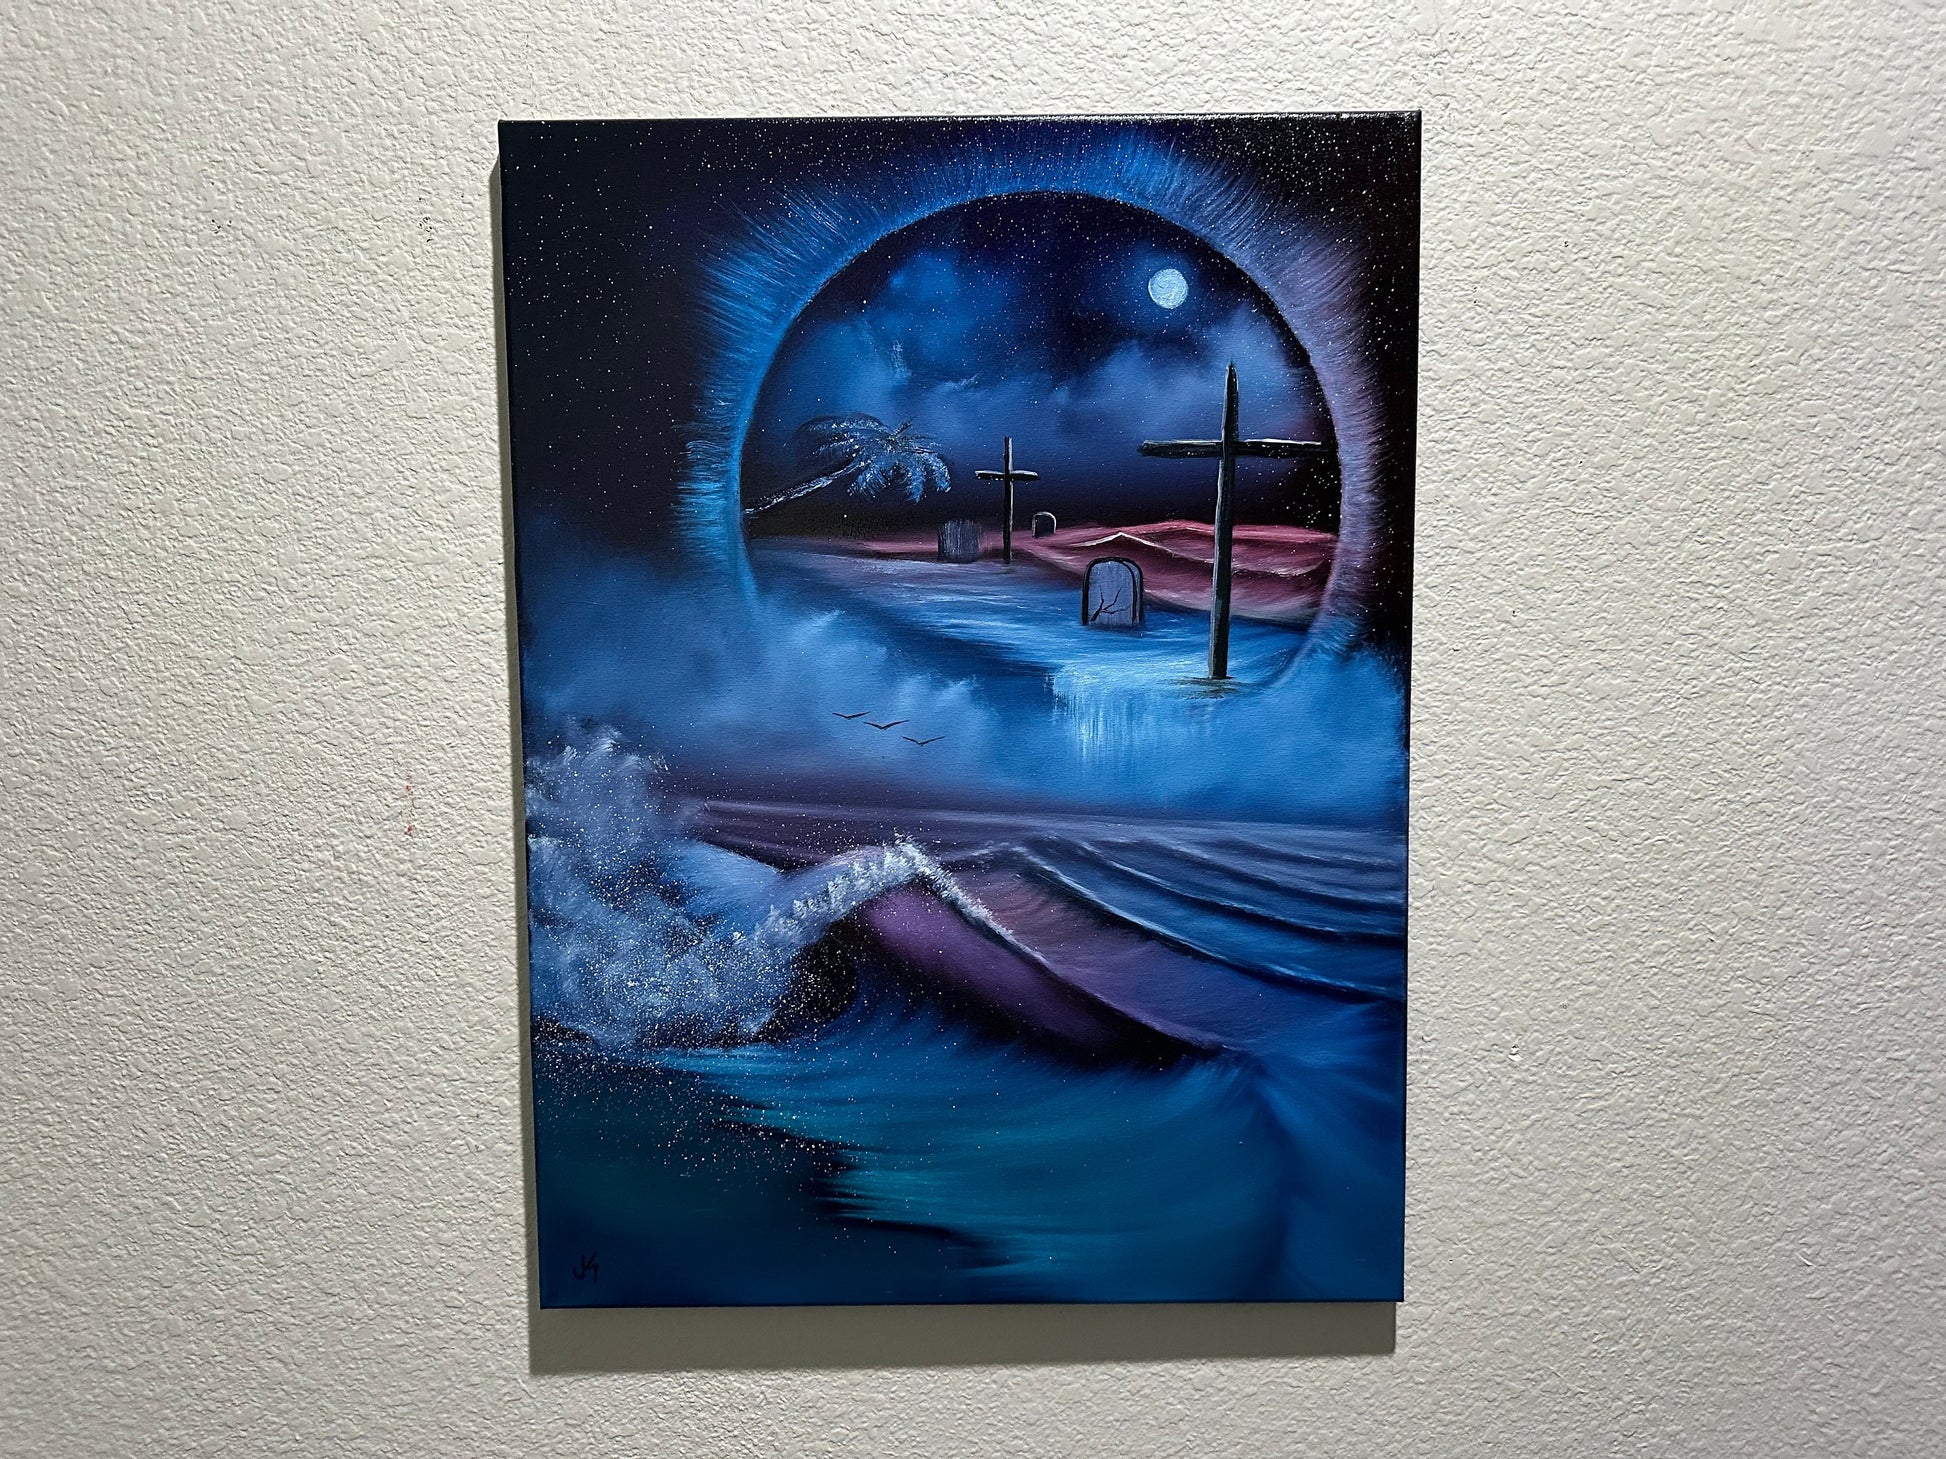 Painting 962 - 18x24" Portal Seascape painted Live on TikTok on 9/26/23 by PaintWithJosh